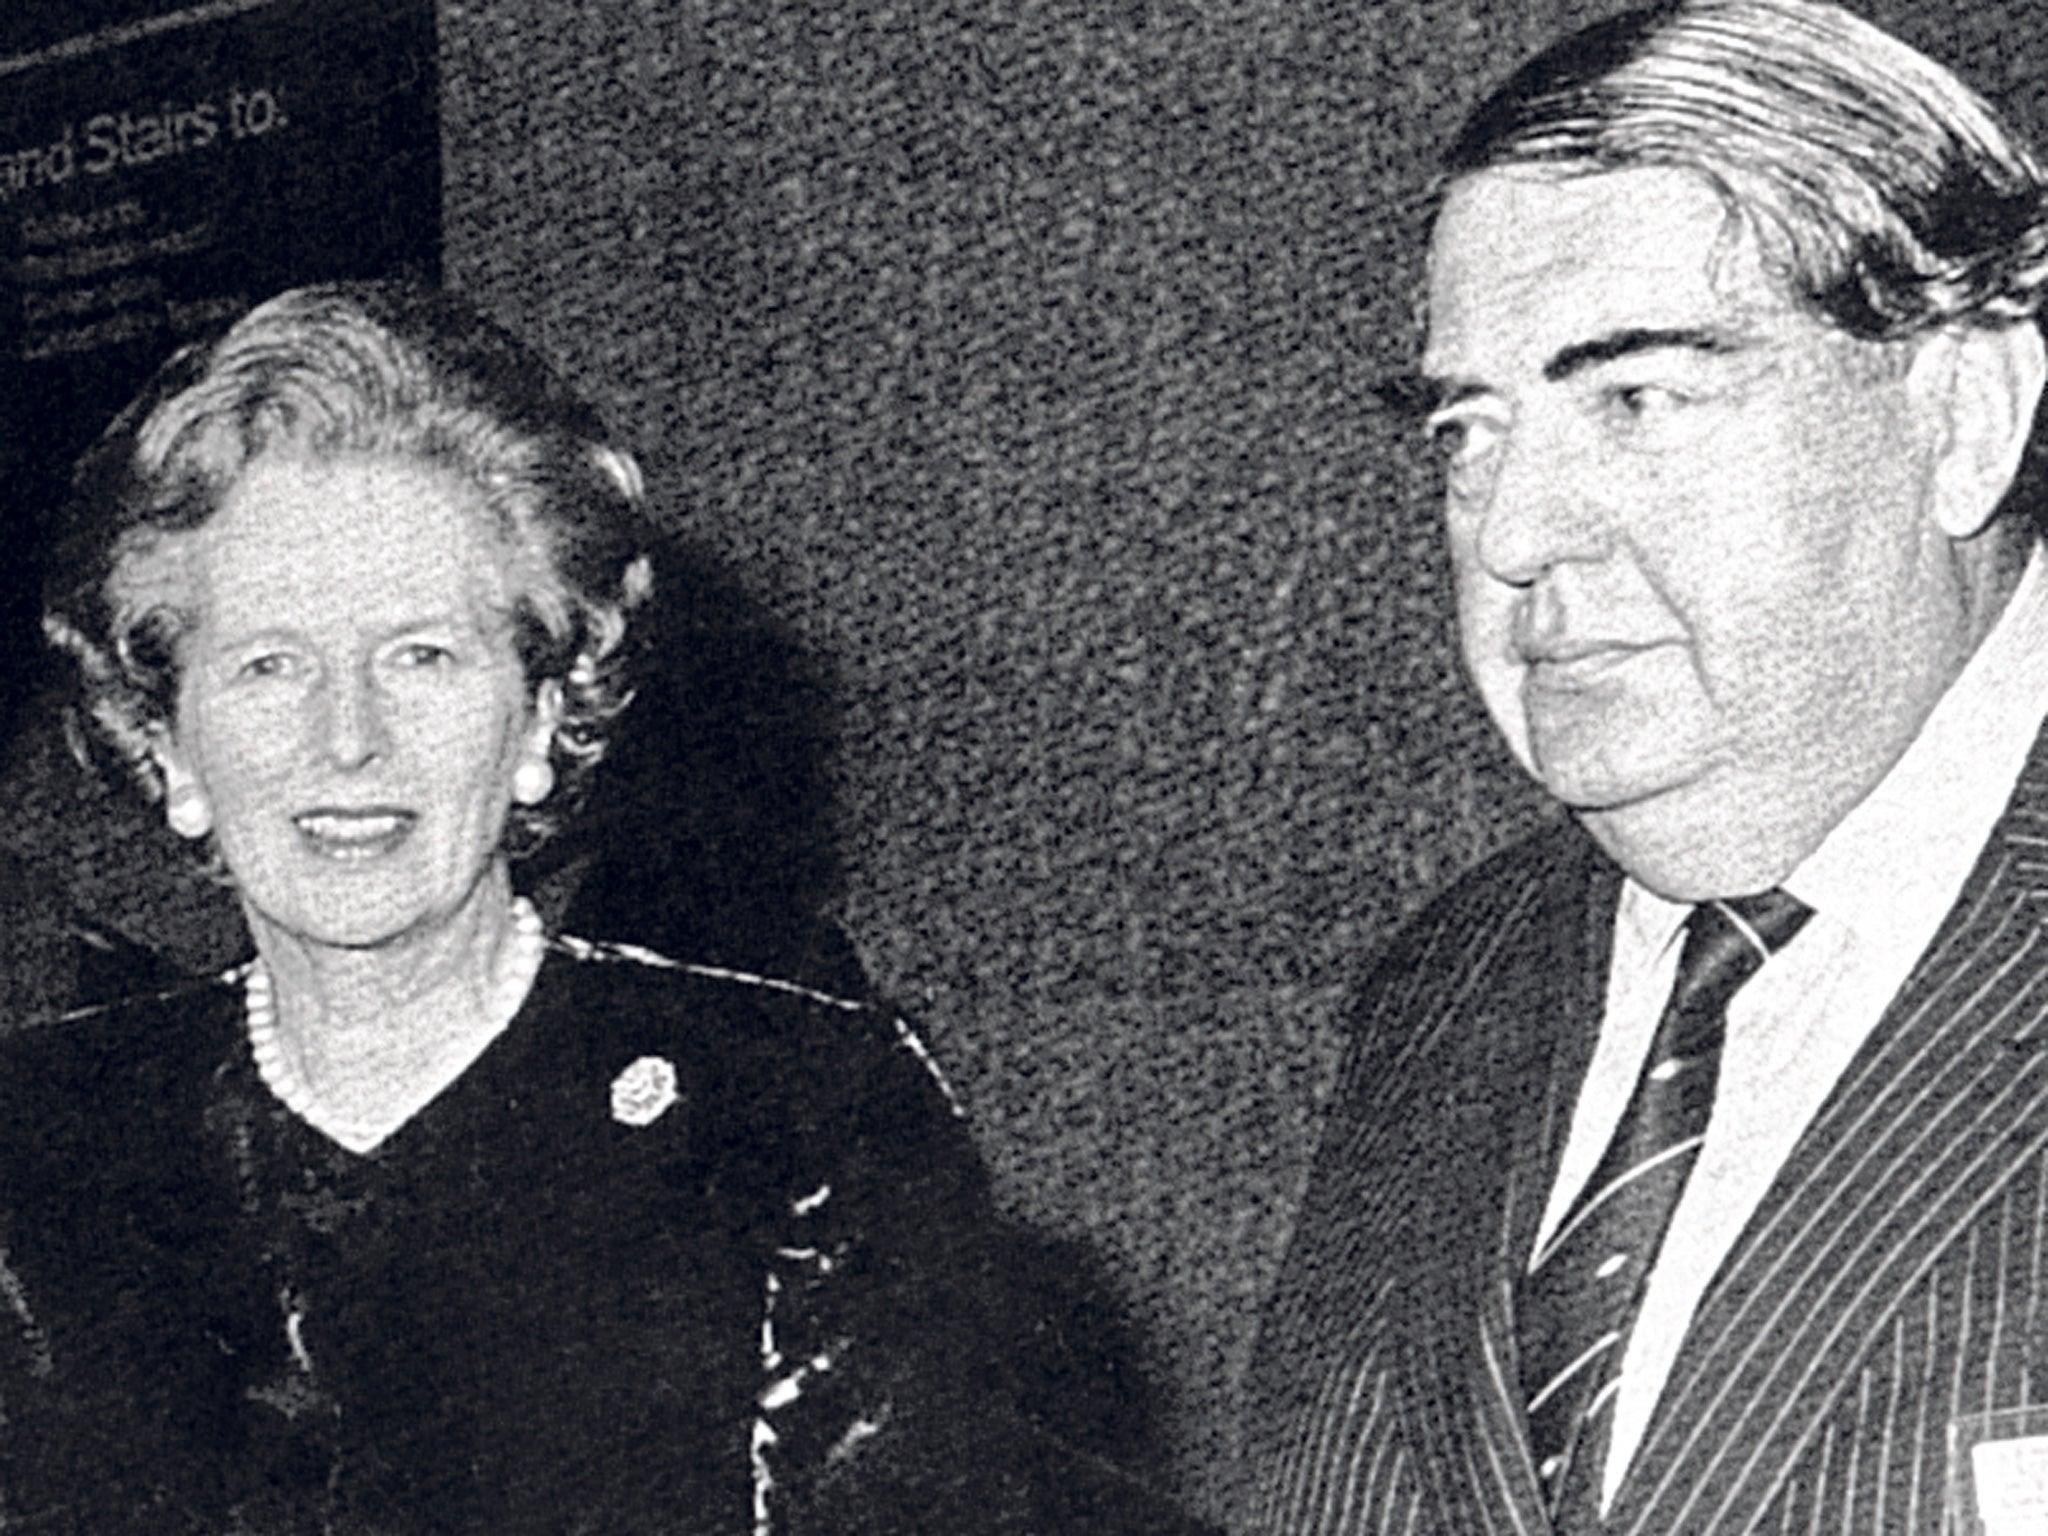 Cavendish escorts Margaret Thatcher at a charity event